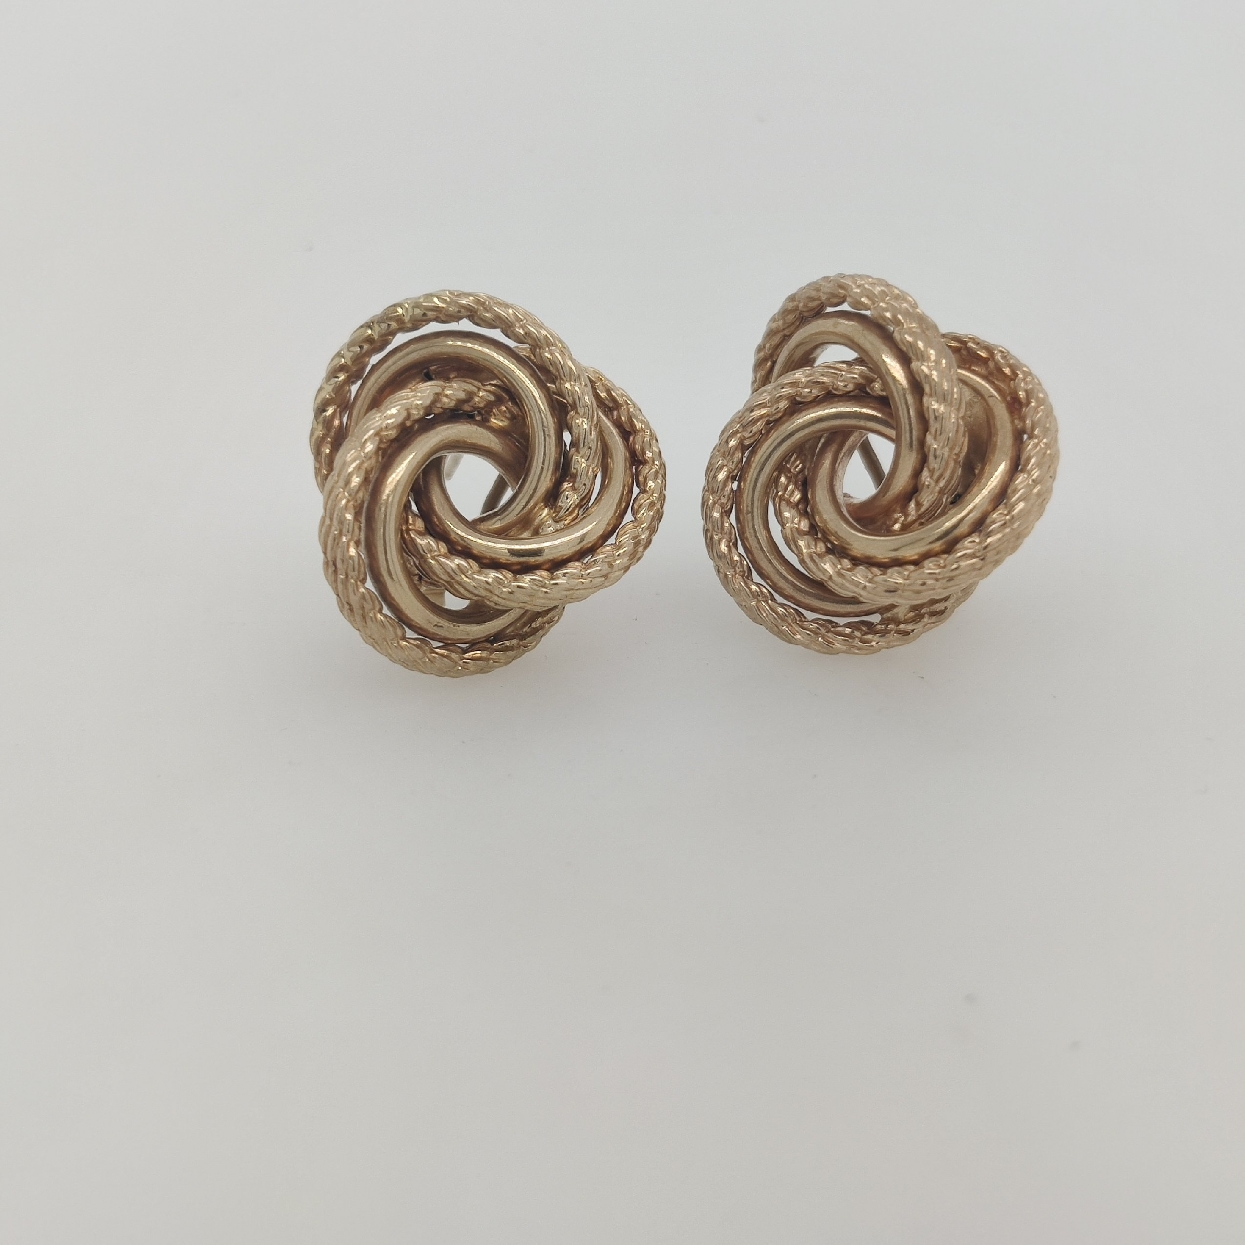 14K Yellow Gold Textured Knot Earrings with Omega Backs